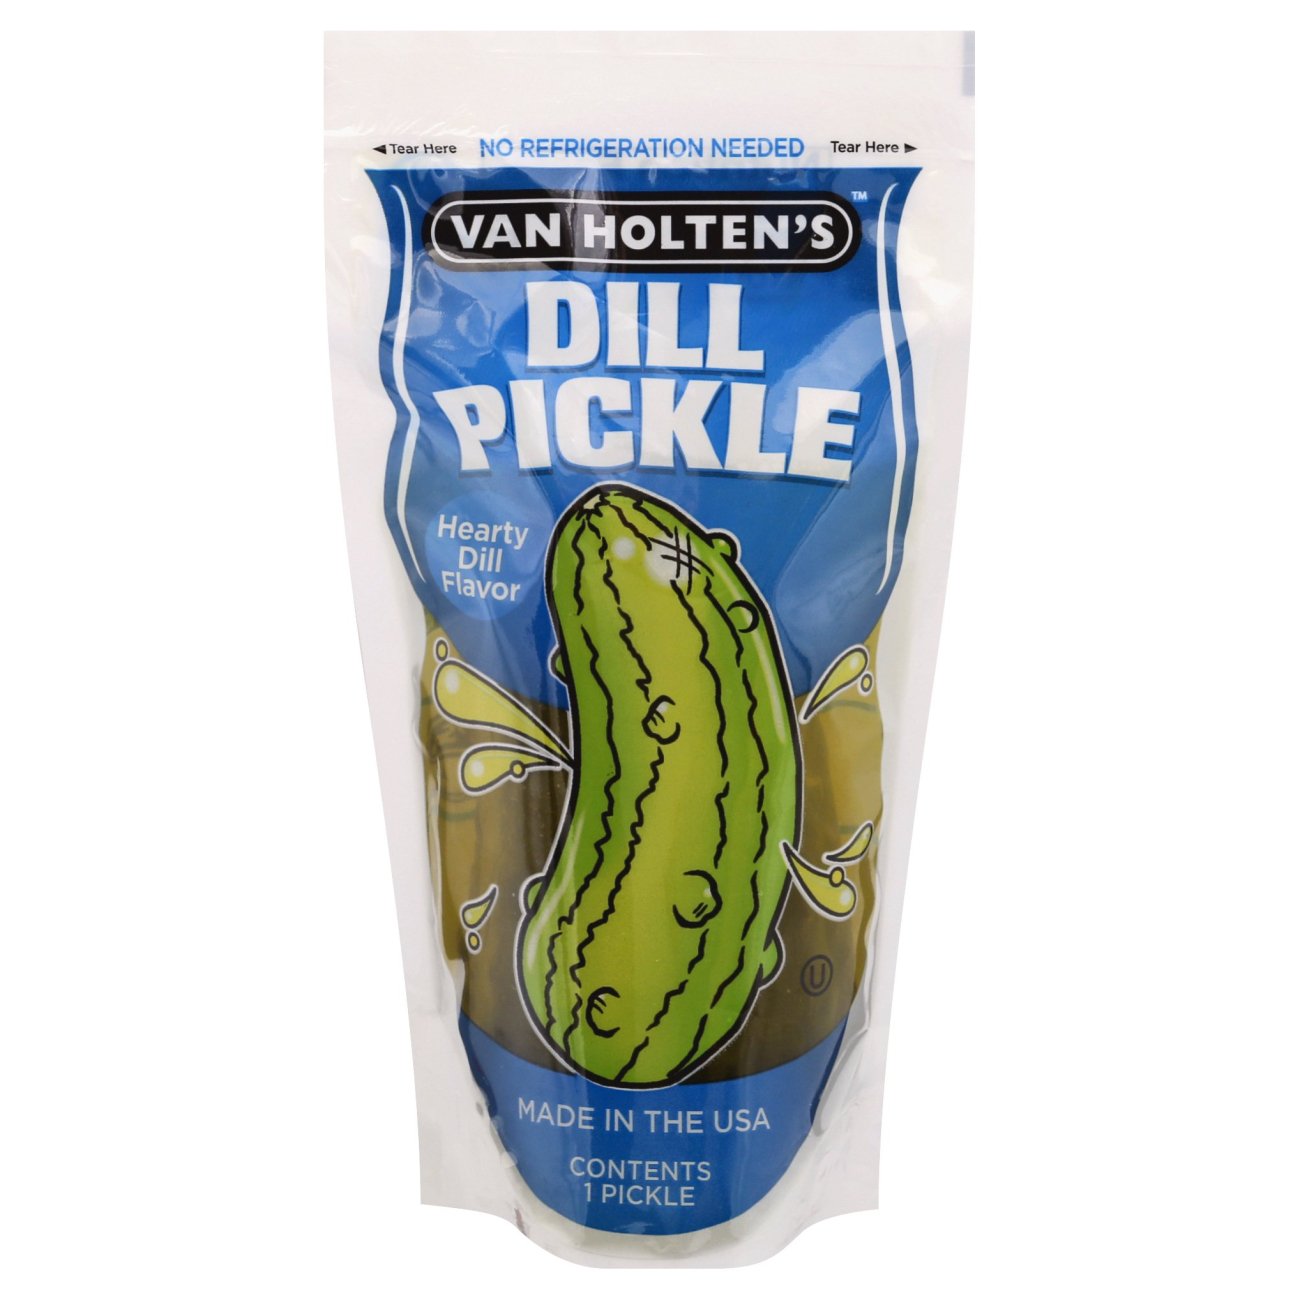 Van Holten's Dill Pickle in a Pouch